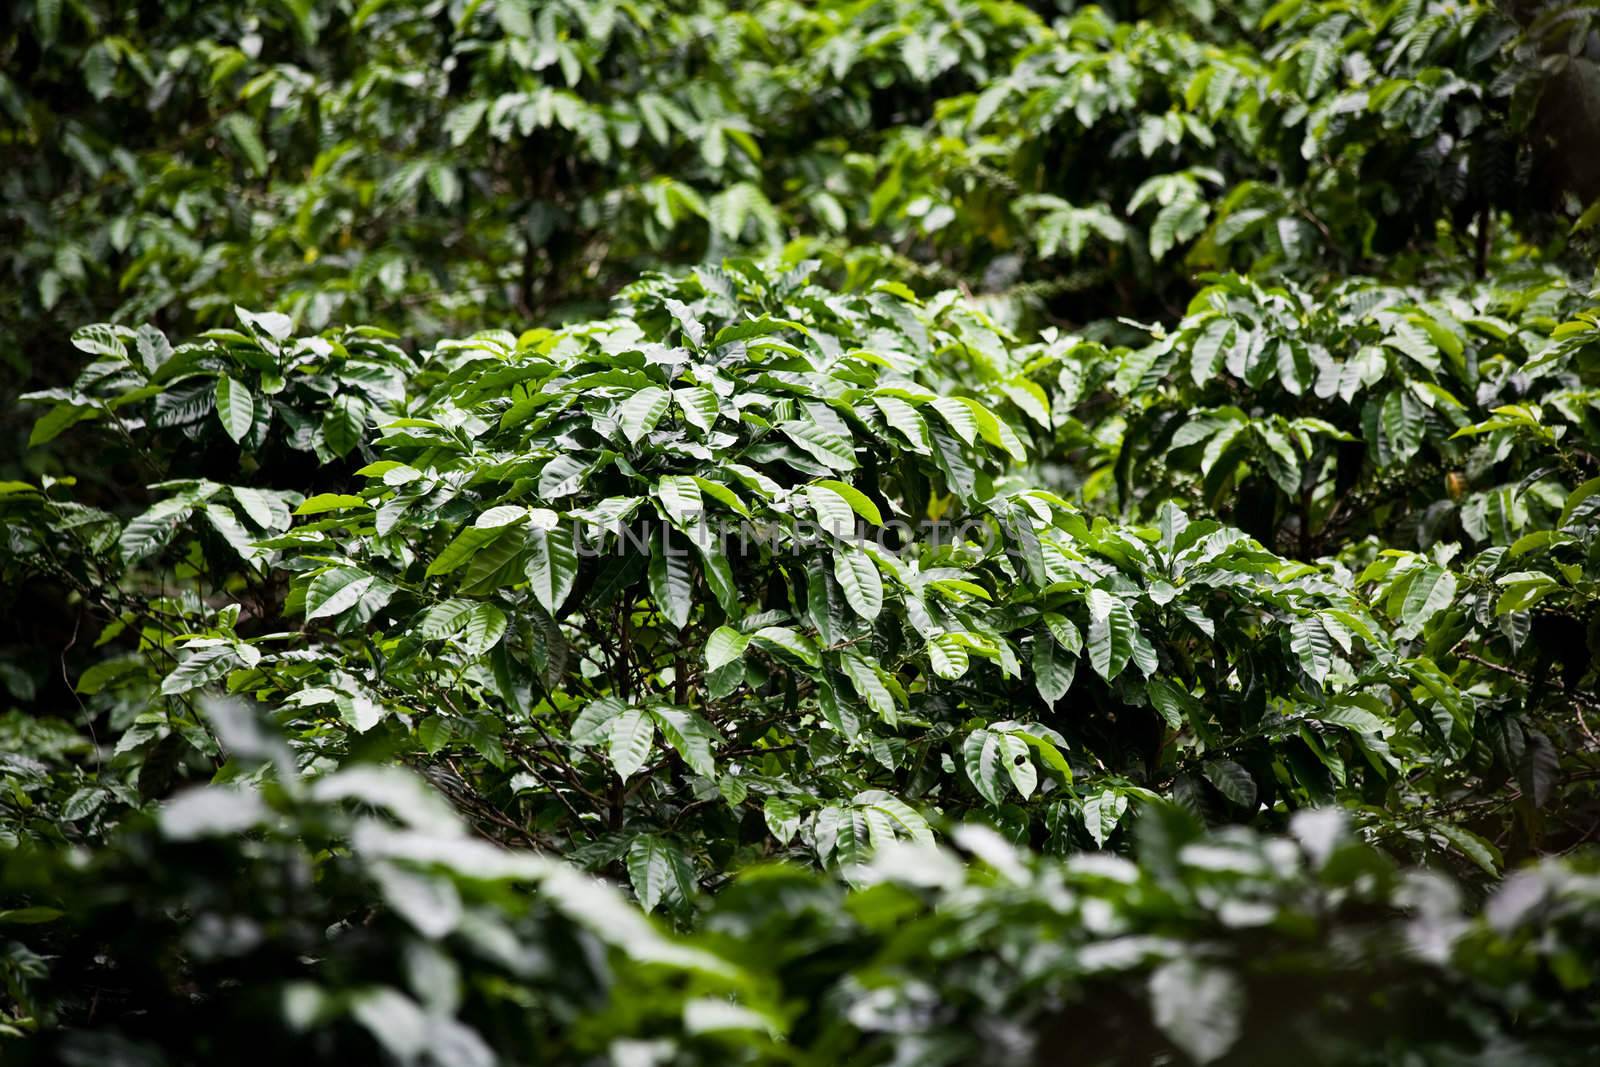 Many coffee plants on plantation in Costa Rica